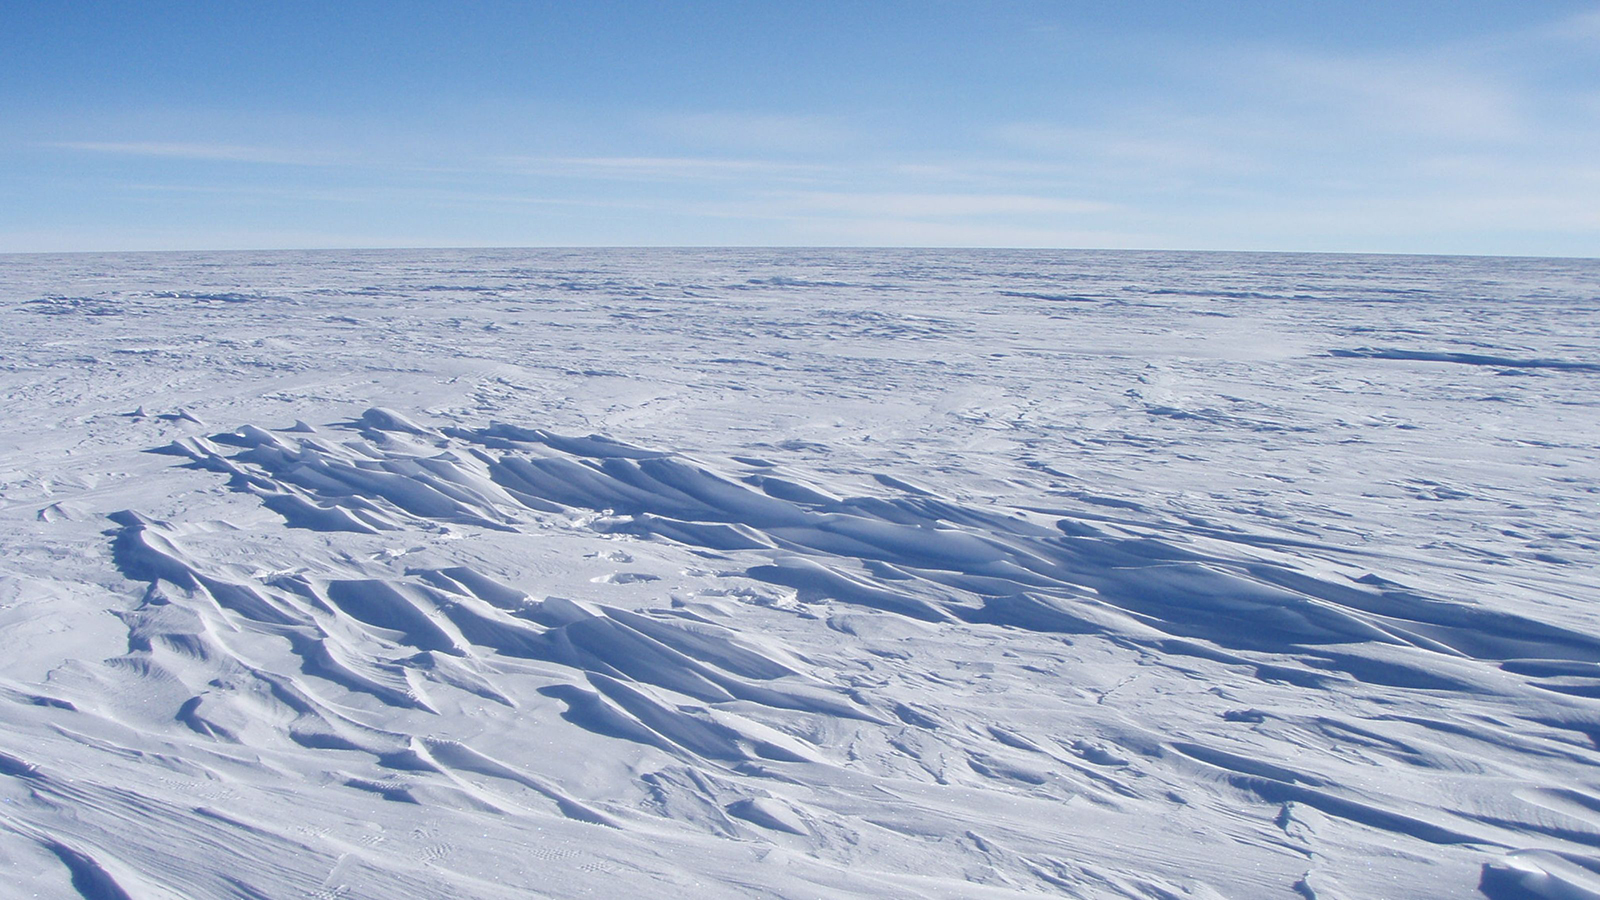 THE WORLD'S COLDEST PLACE- On the high ridge of the East Antarctic Plateau, the temperature can drop to as low as -135.8 degrees Fahrenheit, recorded in August, 2010.